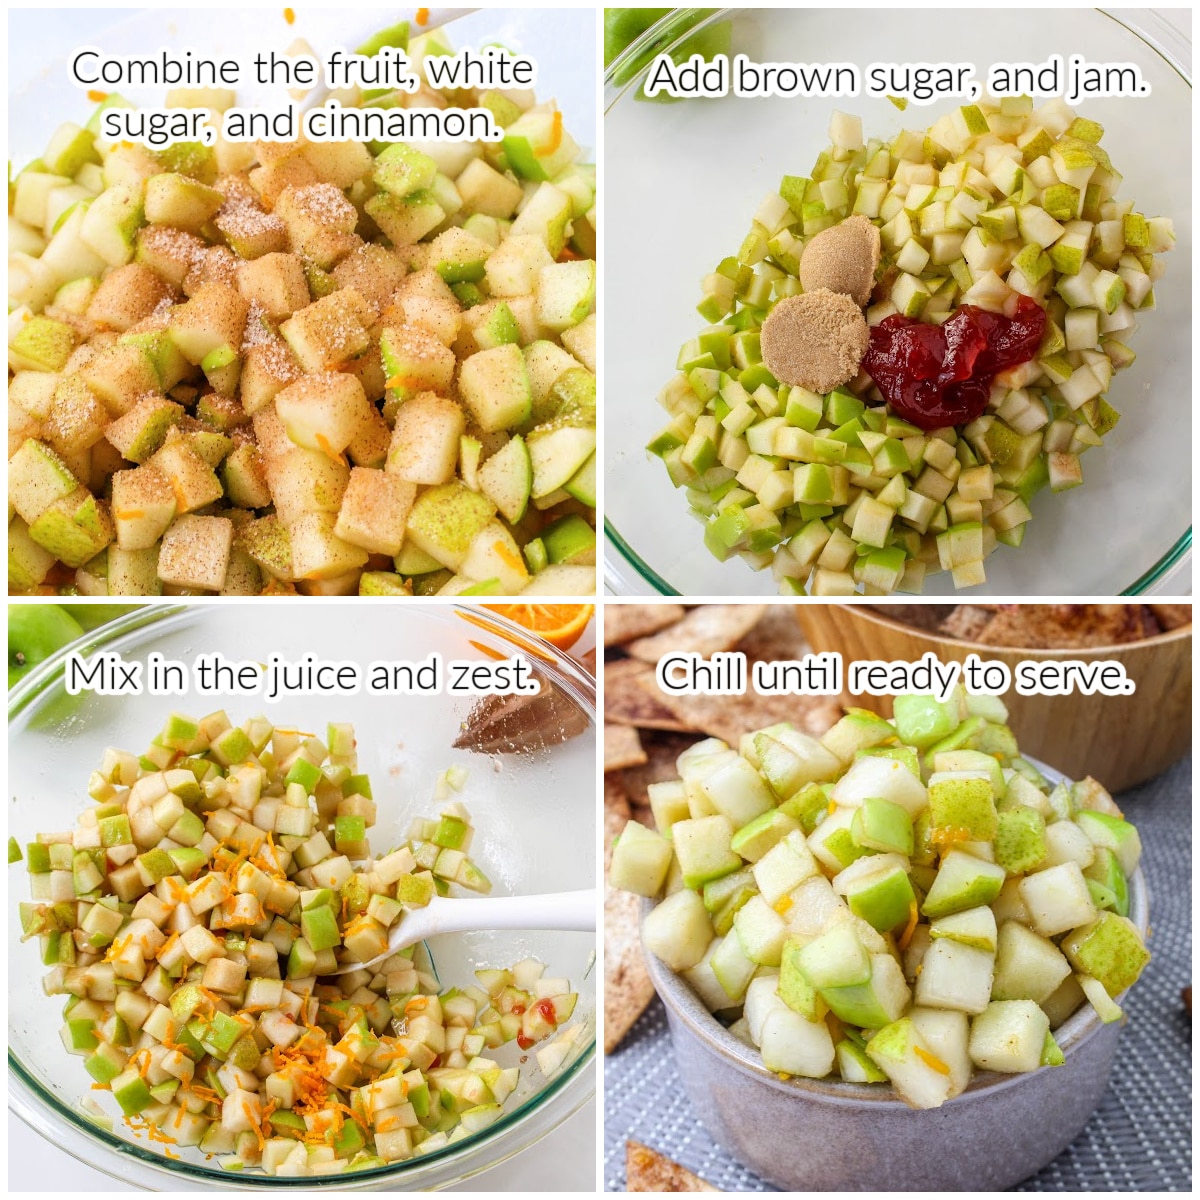 How to Make Apple Salsa collage image with text overlay.